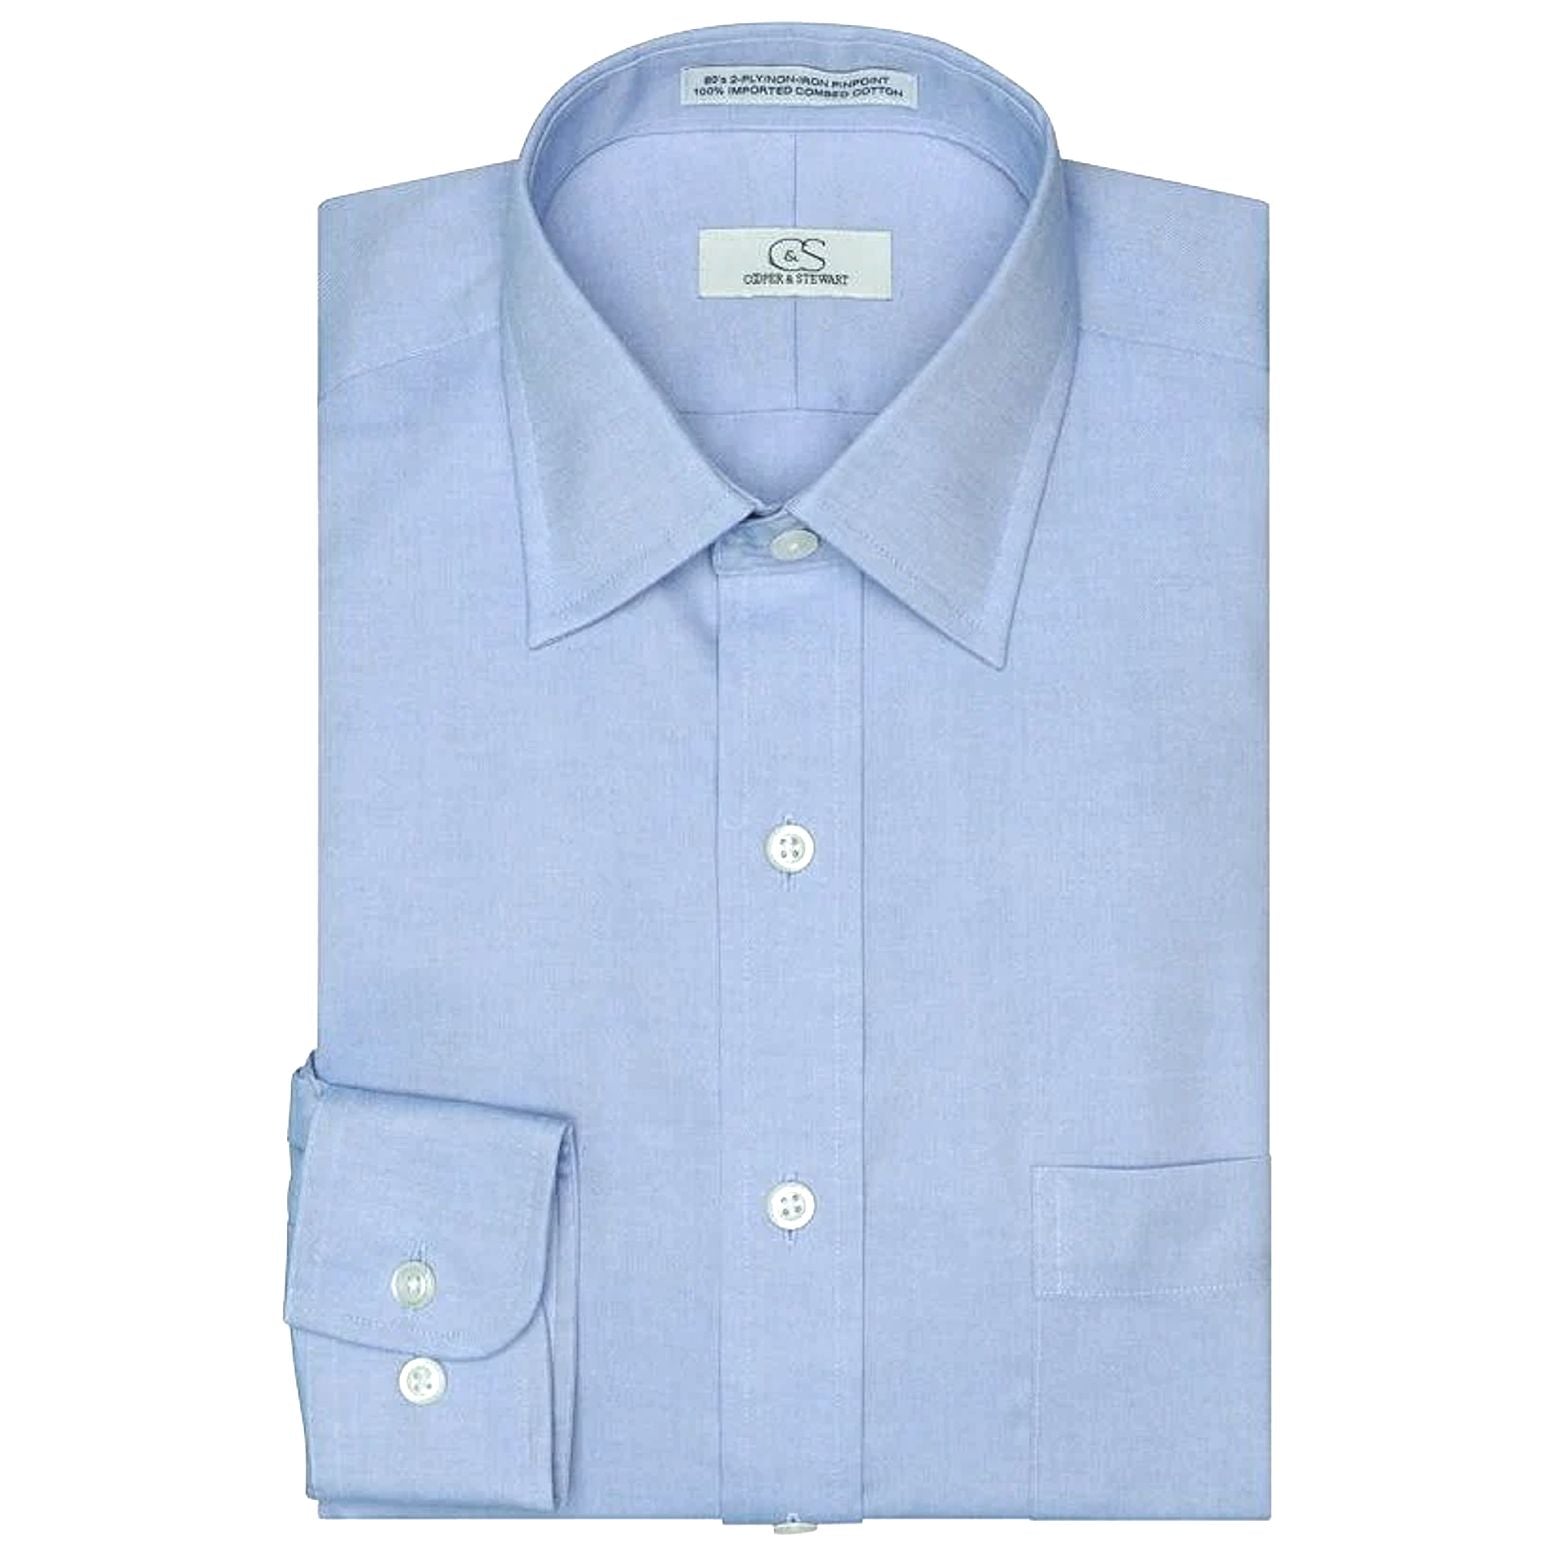 The Classic Blue - Wrinkle-Free Pinpoint Oxford Cotton Dress Shirt by